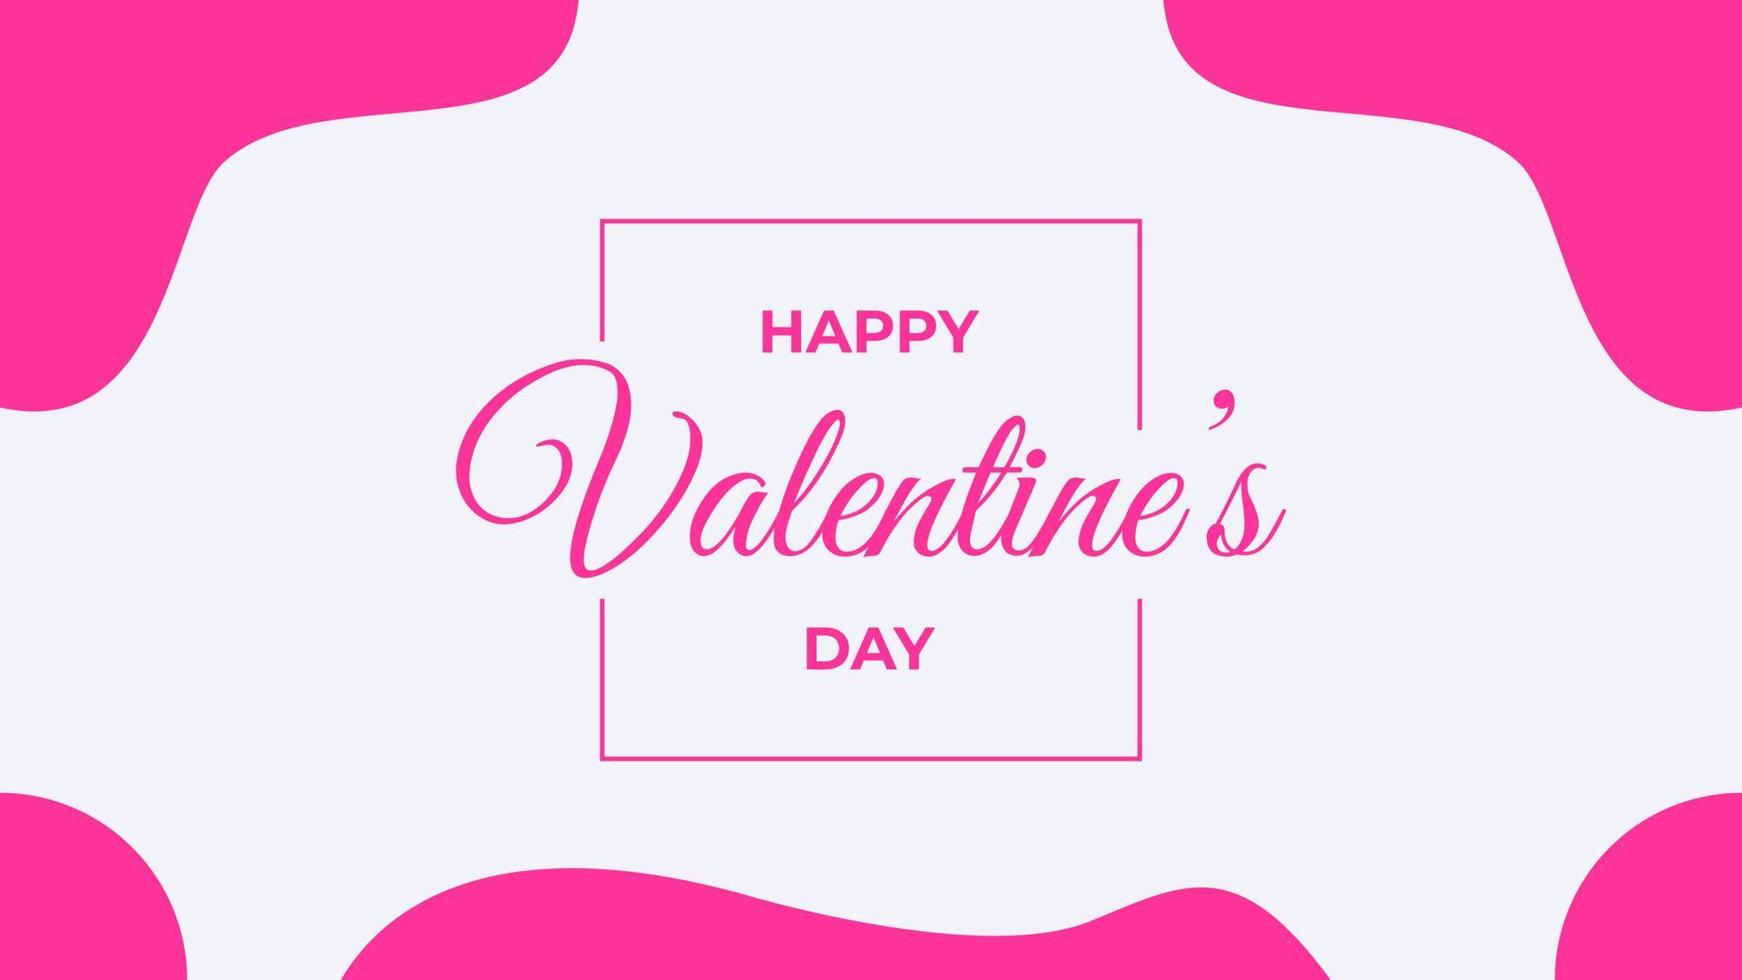 HAPPY VALENTINE'S DAY BANNER DESIGN. SUITABLE TO USE ON VALENTINE'S DAY EVENT vector